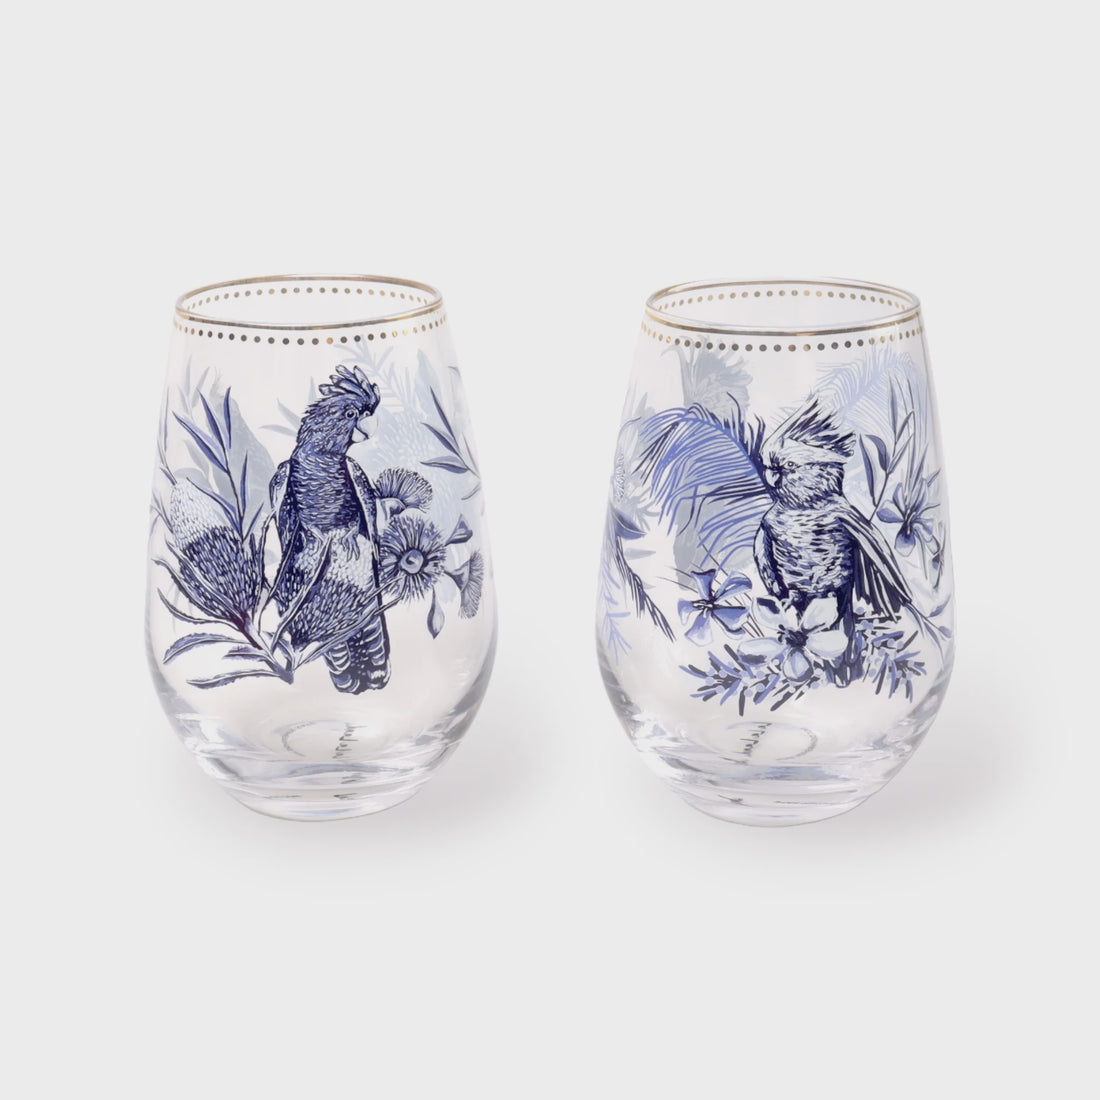 Glass Tumbler Set of 2 - Dynasty of Nature